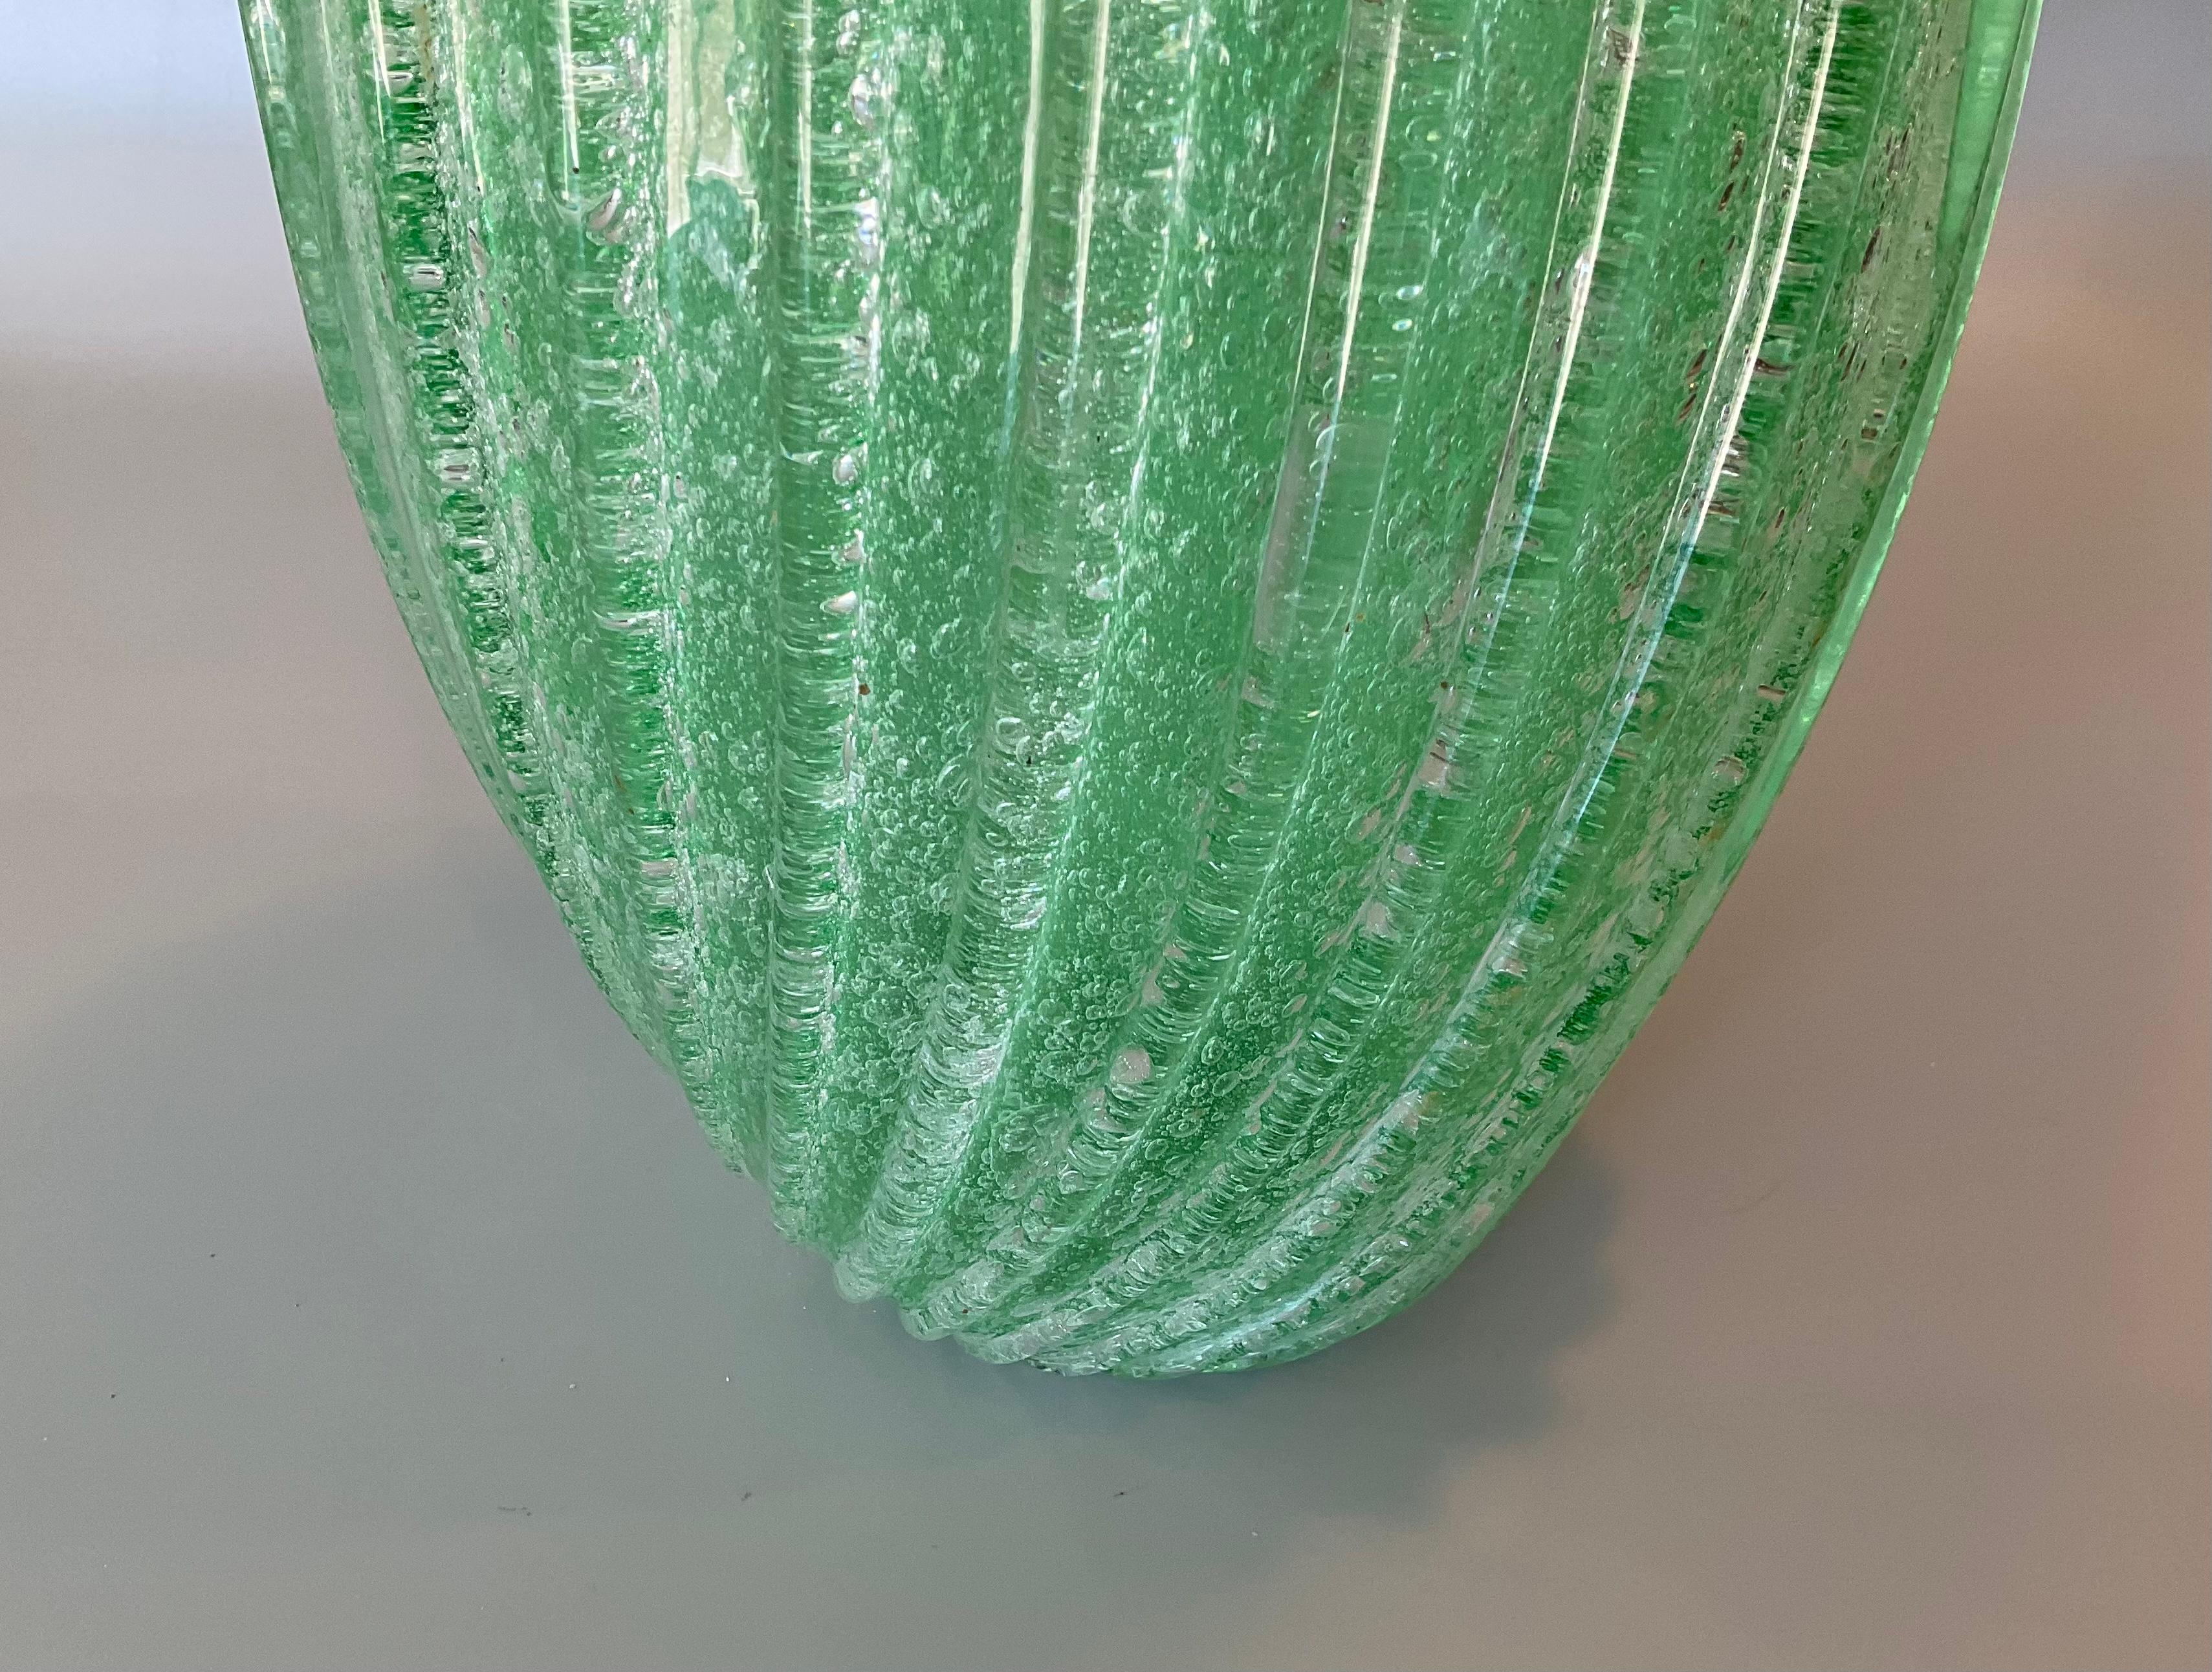 Large Murano Art Glass Vase in Green Pulegoso Glass with Ribbed Design Scalloped In Good Condition For Sale In Ann Arbor, MI